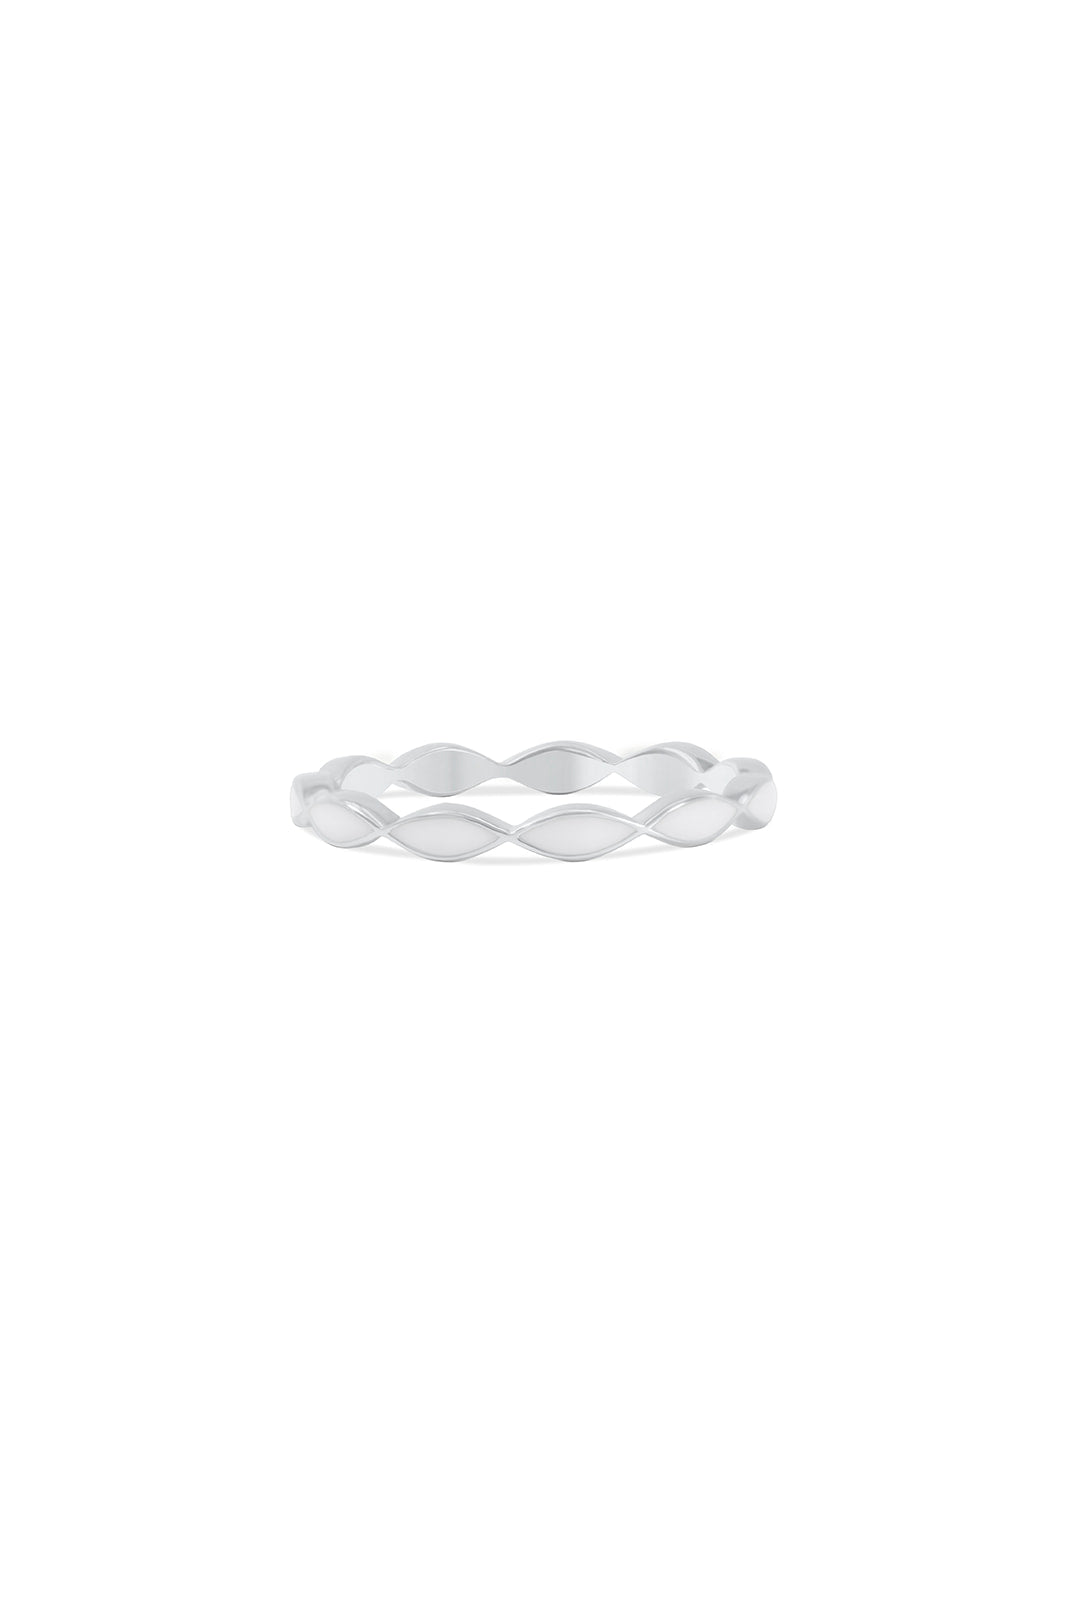 Breastmilk Simple Eternity Band - White Gold 